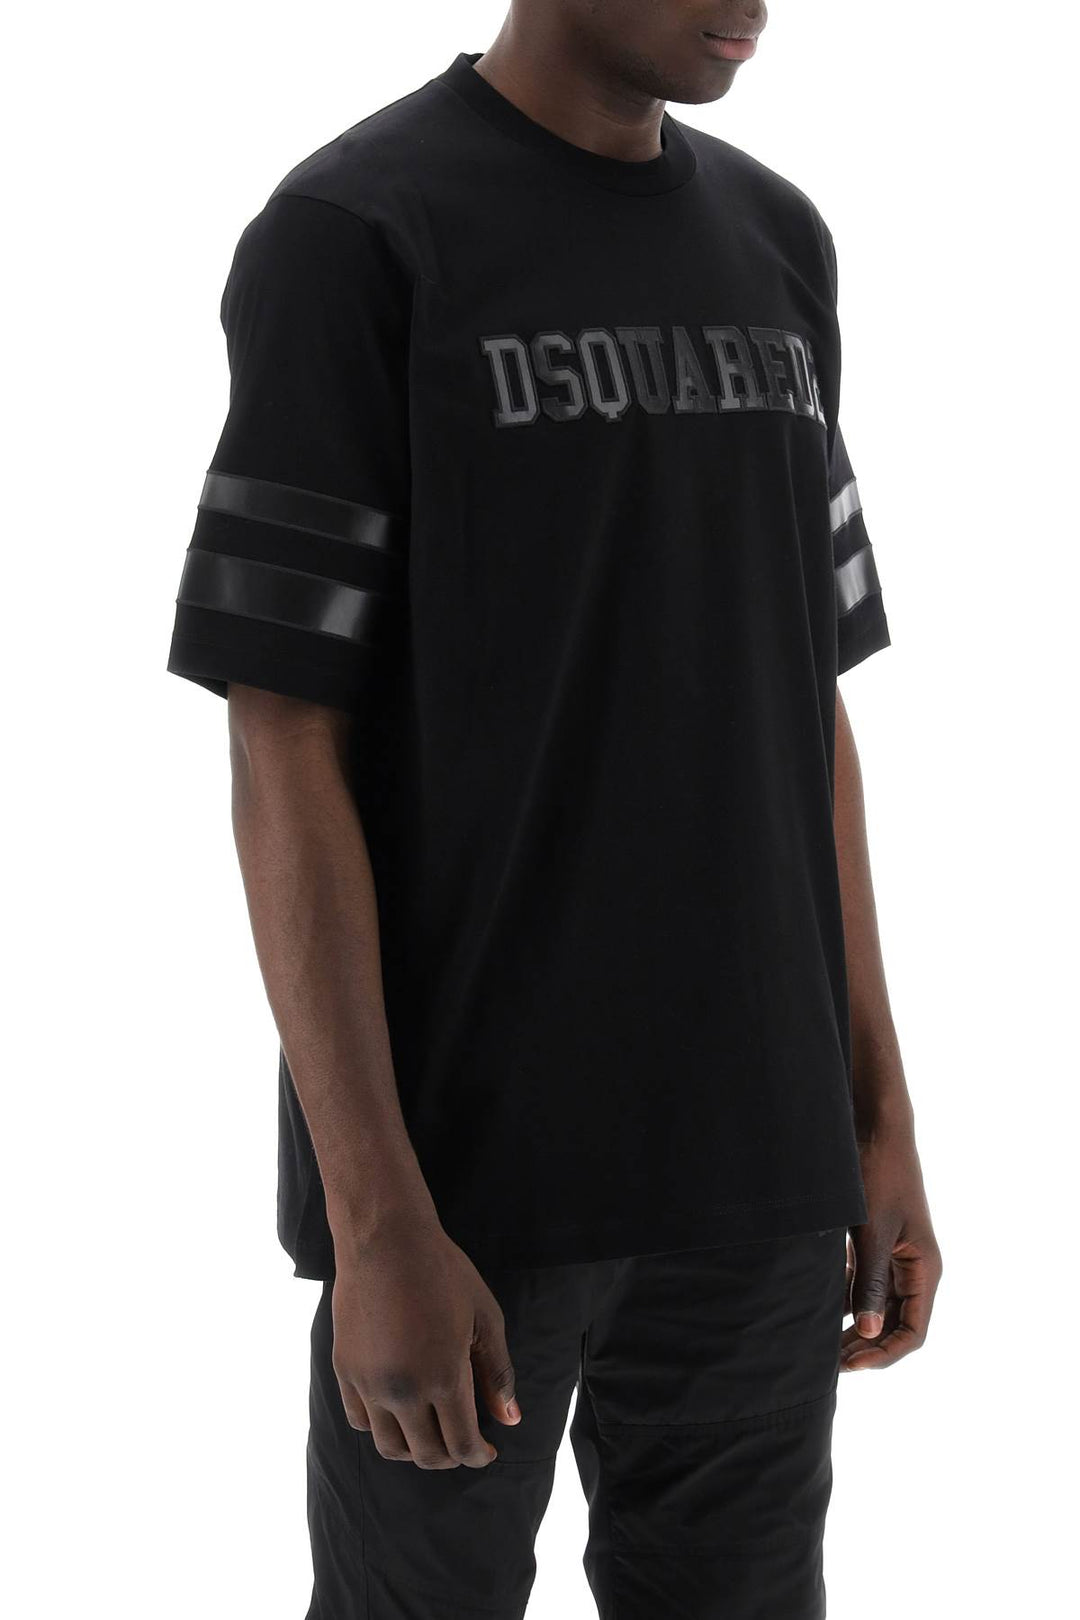 Dsquared2 T Shirt With Faux Leather Inserts   Nero